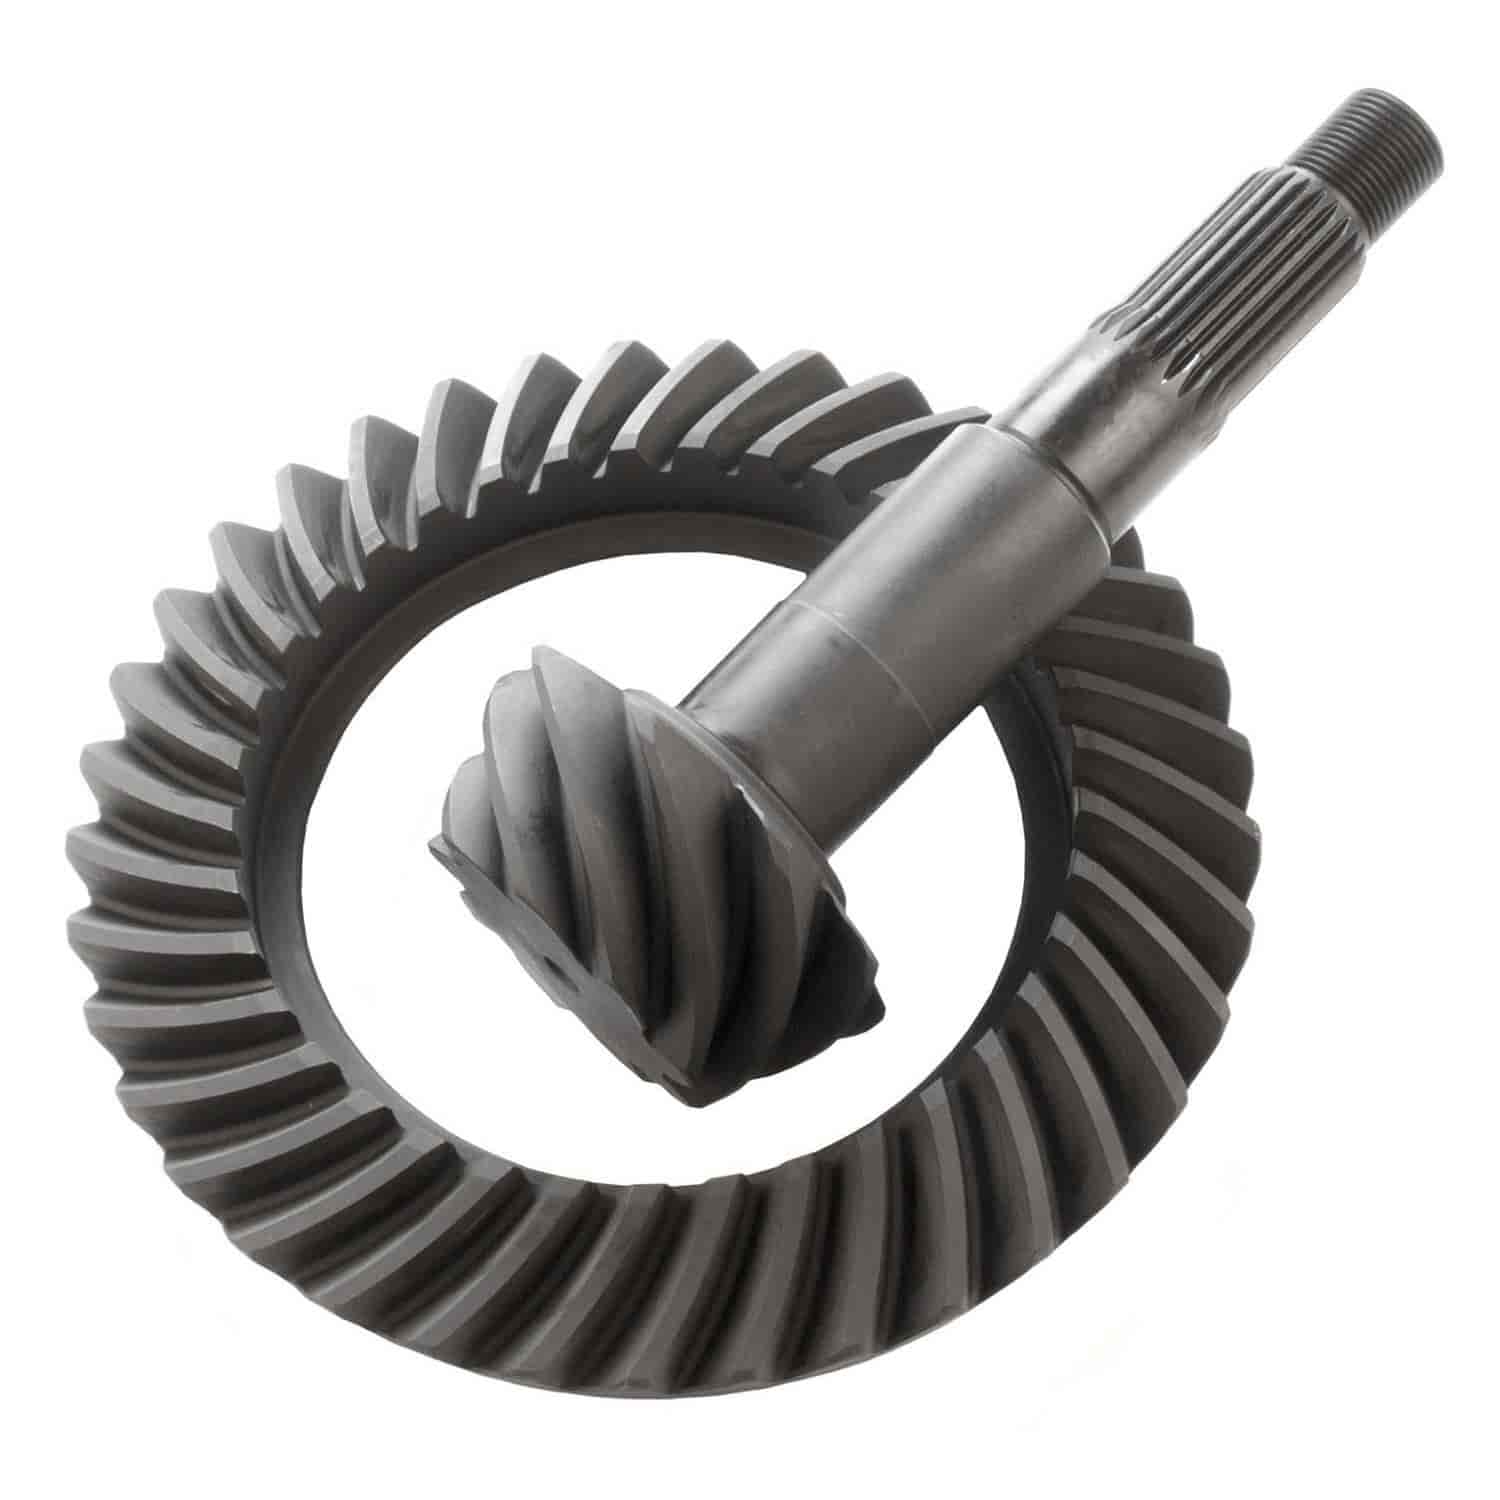 3.36 Ratio SVL 10004608 Differential Ring and Pinion Gear Set for GM 8.2 